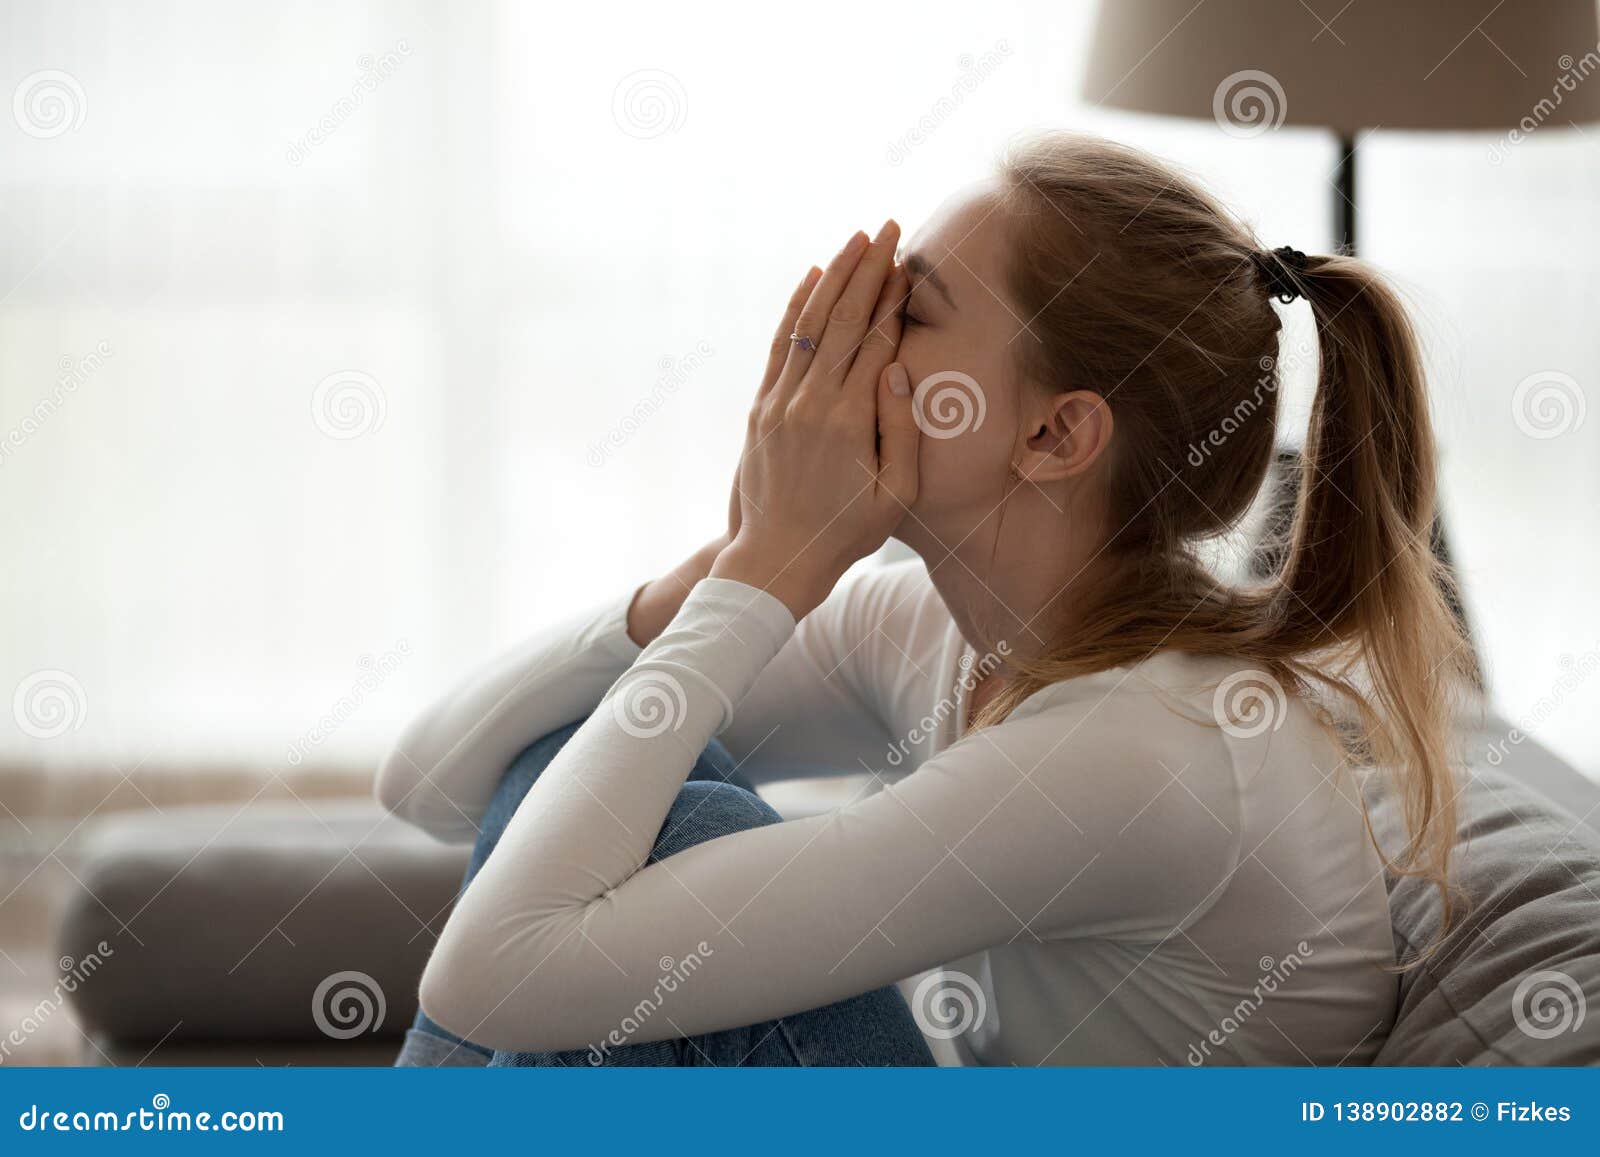 Depressed Upset Young Woman Crying Alone at Home Stock Photo ...